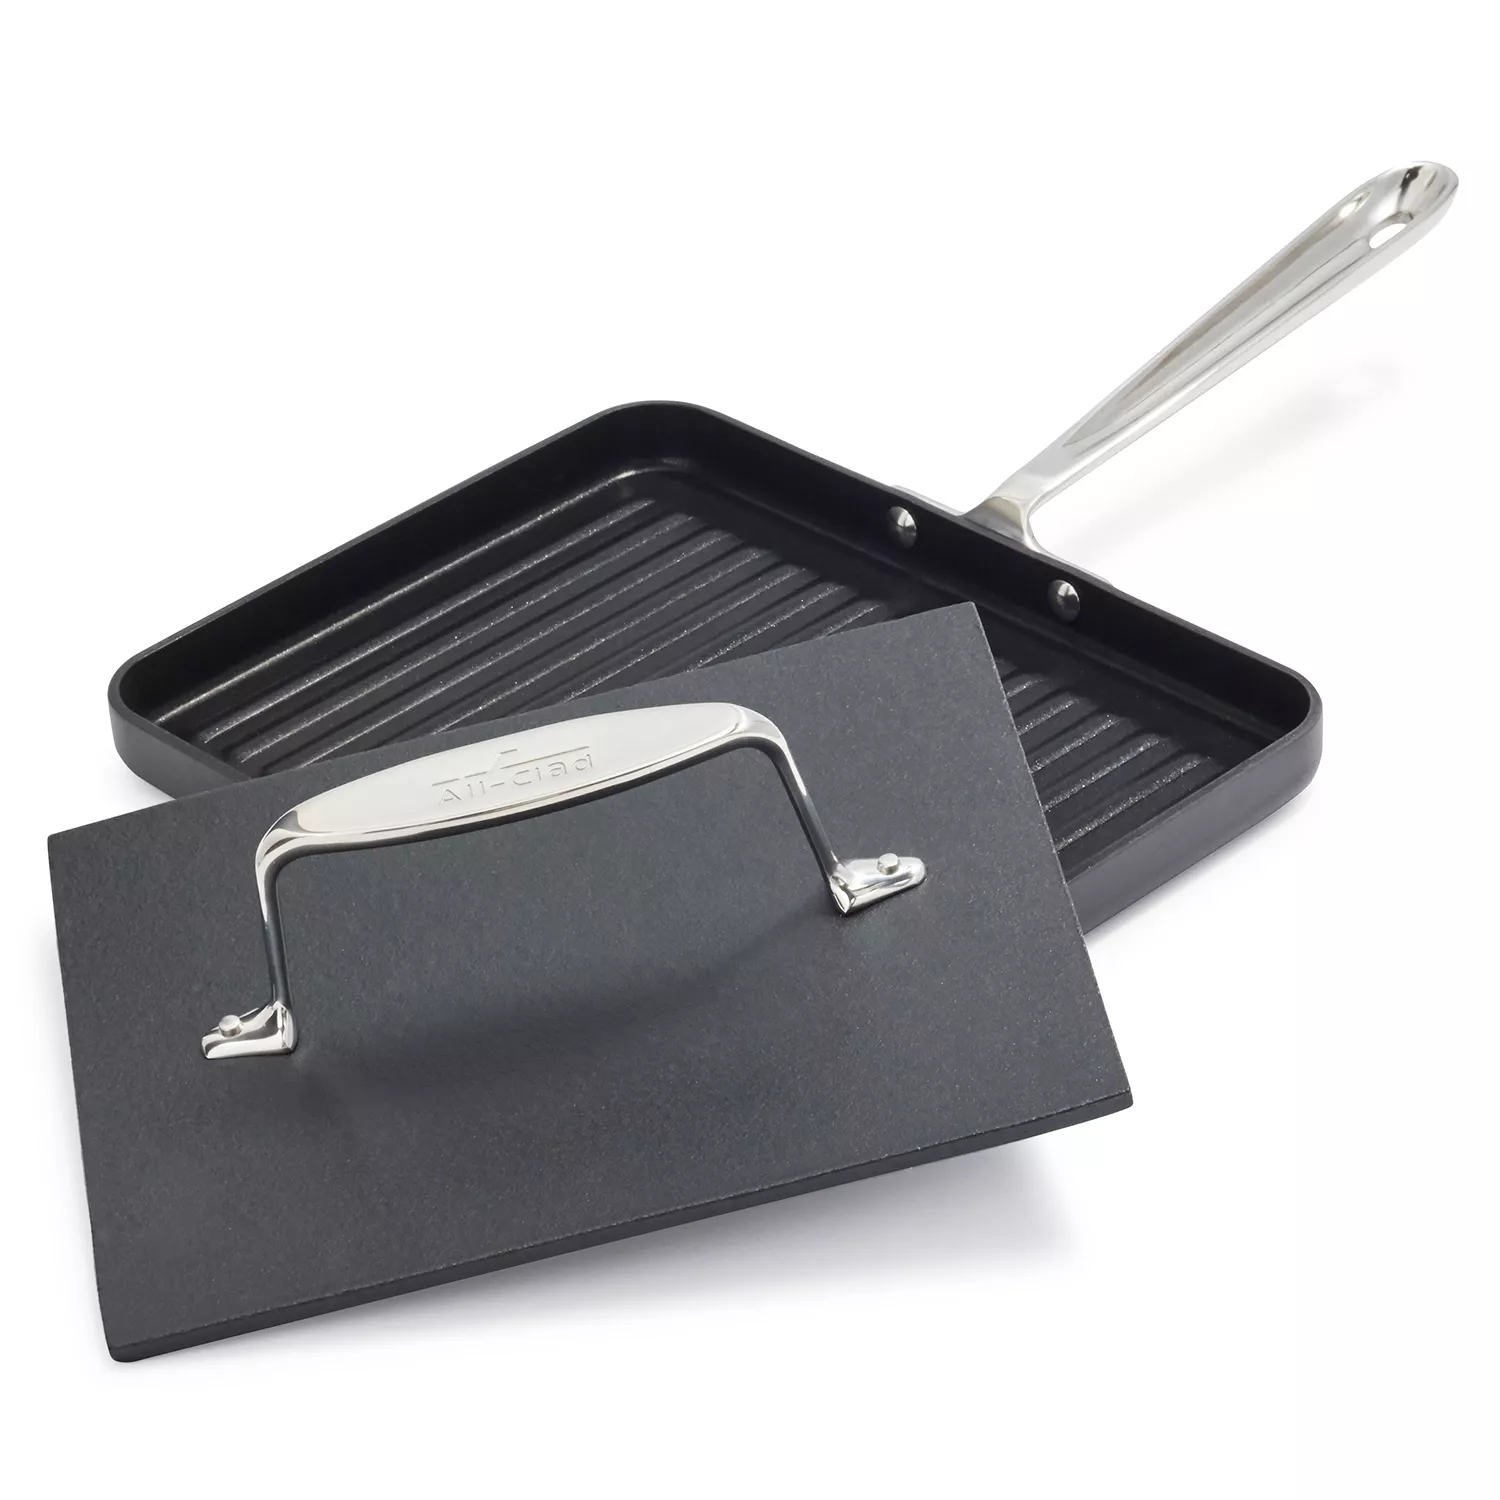 Grill and Panini Press - Non-Stick Sandwich Press Hot Ham and Cheese, 1  unit - Fry's Food Stores